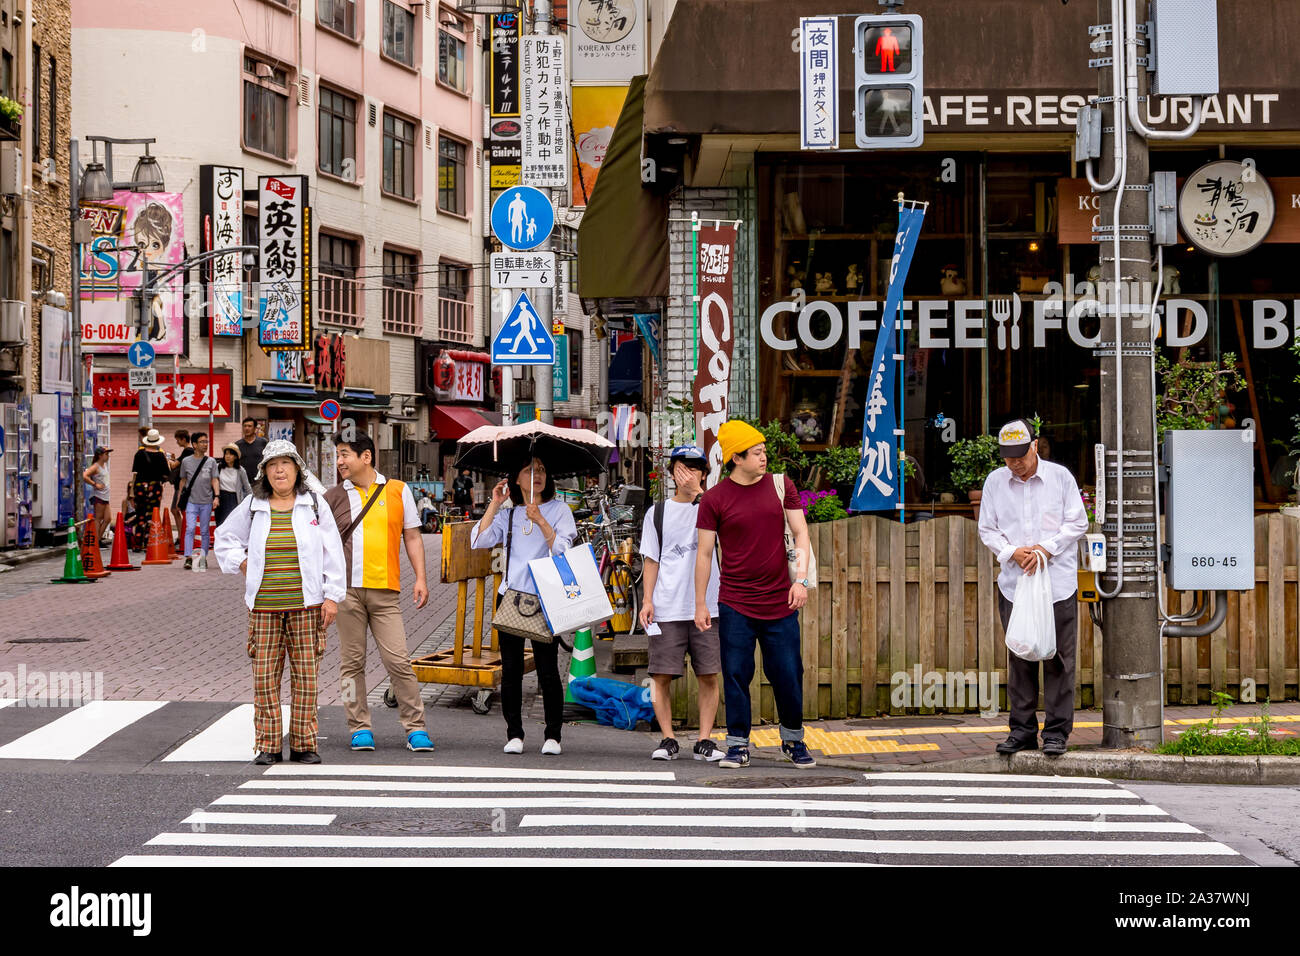 Japanese people ages 20s to 70s waiting at a crosswalk on a red light in Tokyo, Japan Stock Photo